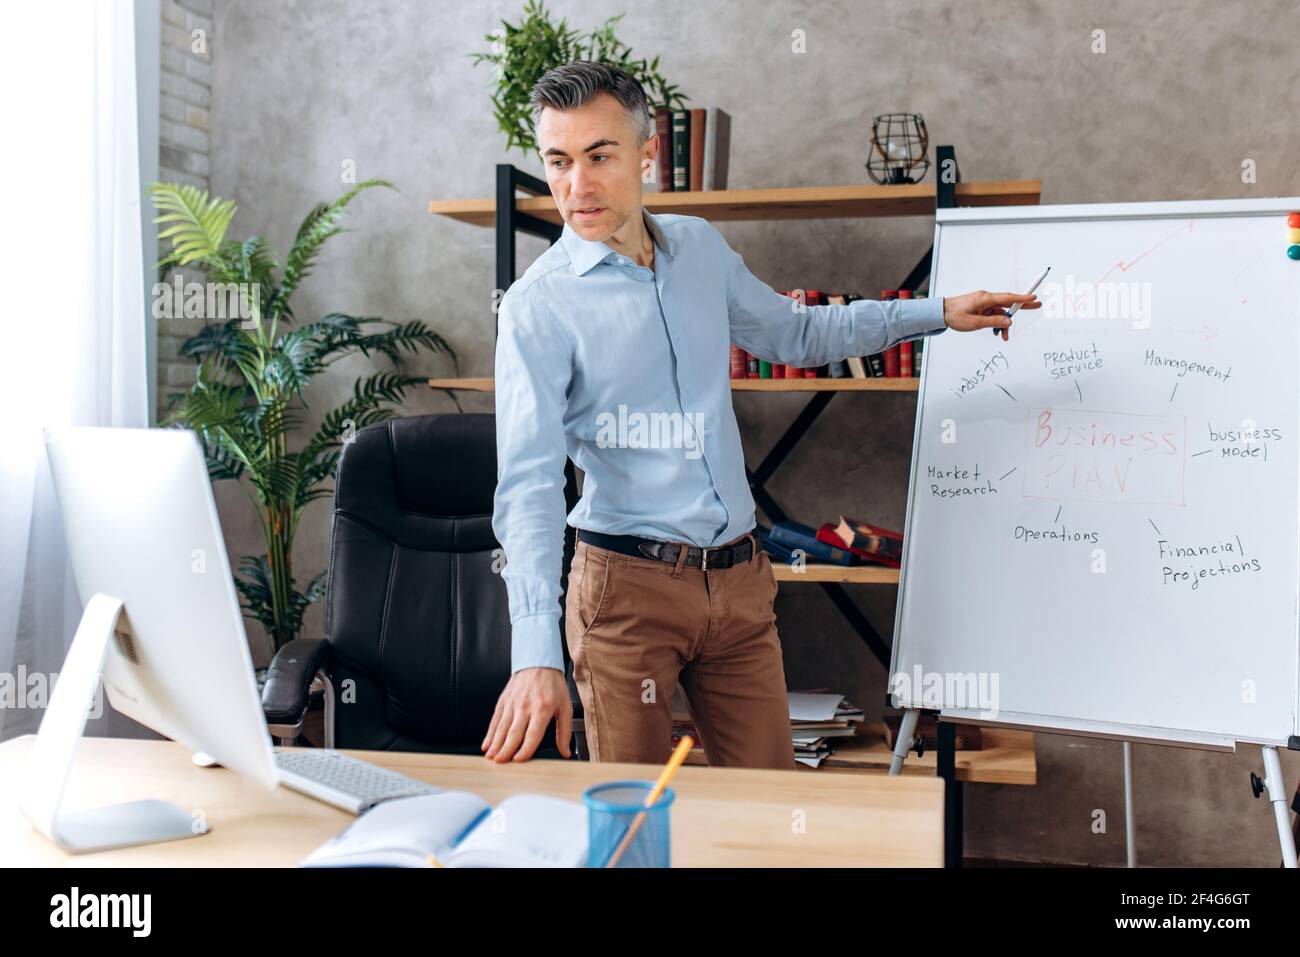 Serious influential modern caucasian middle aged ceo or manager, conducts online briefing for coworkers via video conference, shows a presentation about company business plan on a flipchart Stock Photo